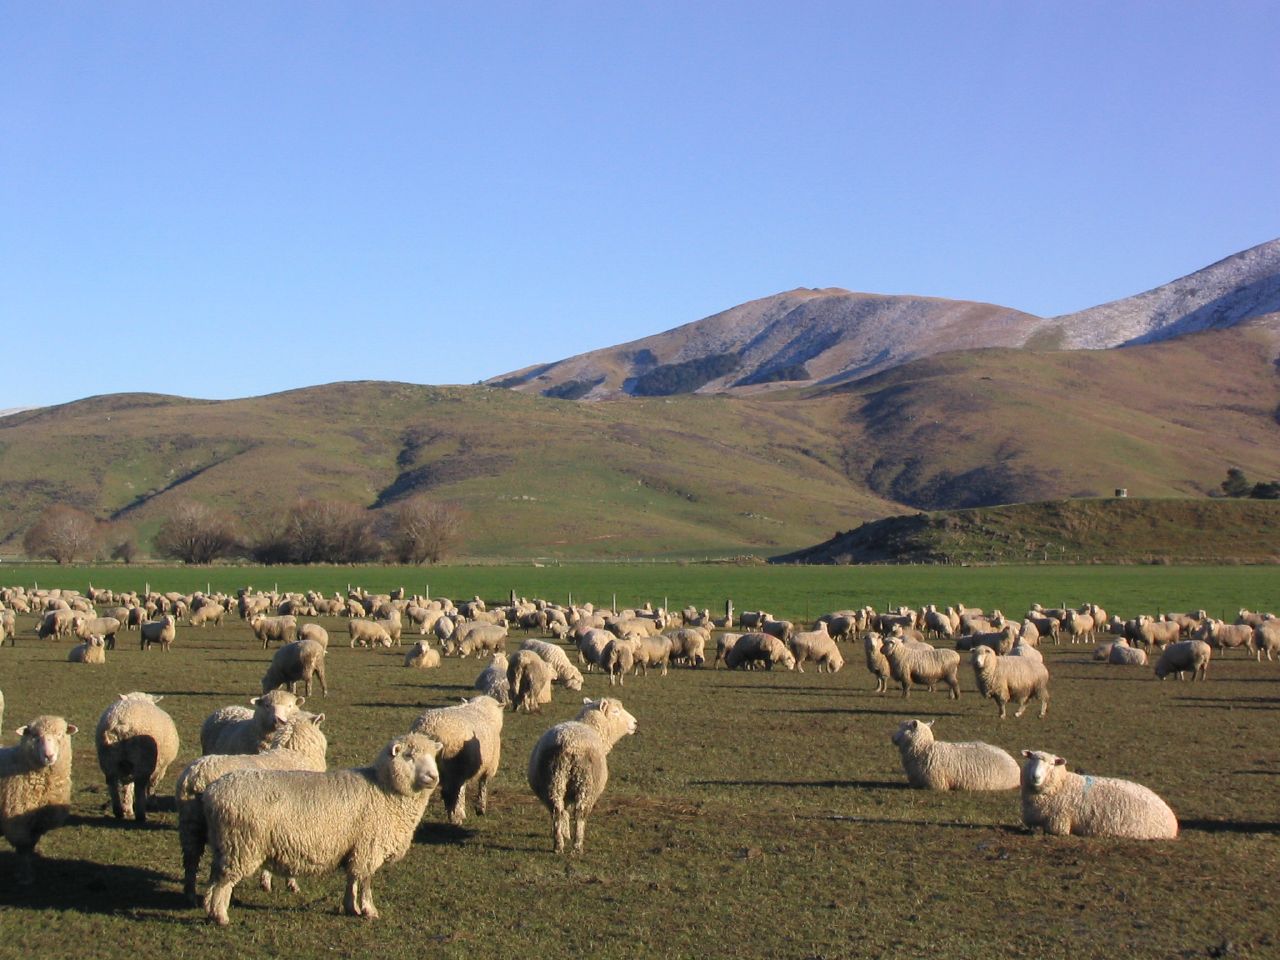 there is a lot of sheep that are eating grass